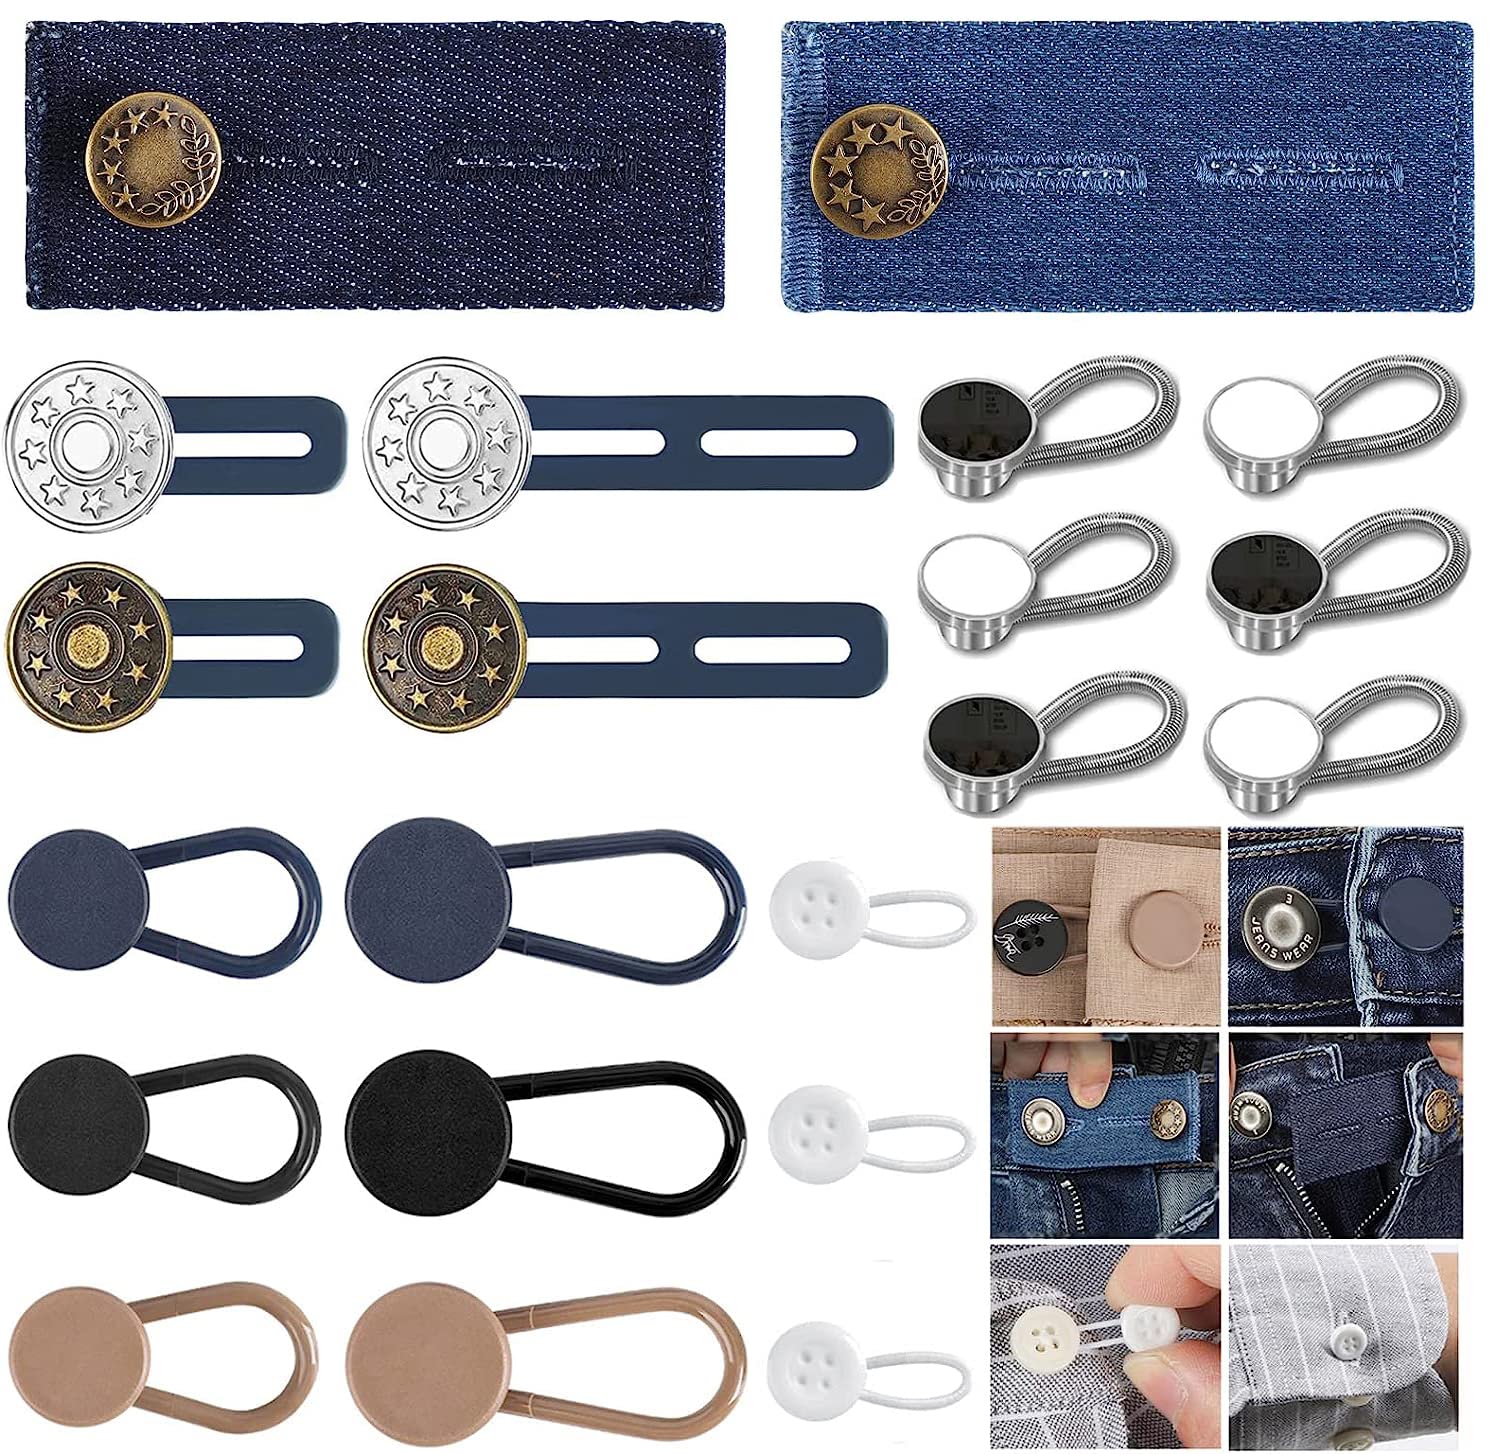 16pcs Button Extenders for Jeans, Elastic Collar Neck Extenders,No Sewing Adjustable Waistband Extender Button for Women and Men's Pants Jeans Dress